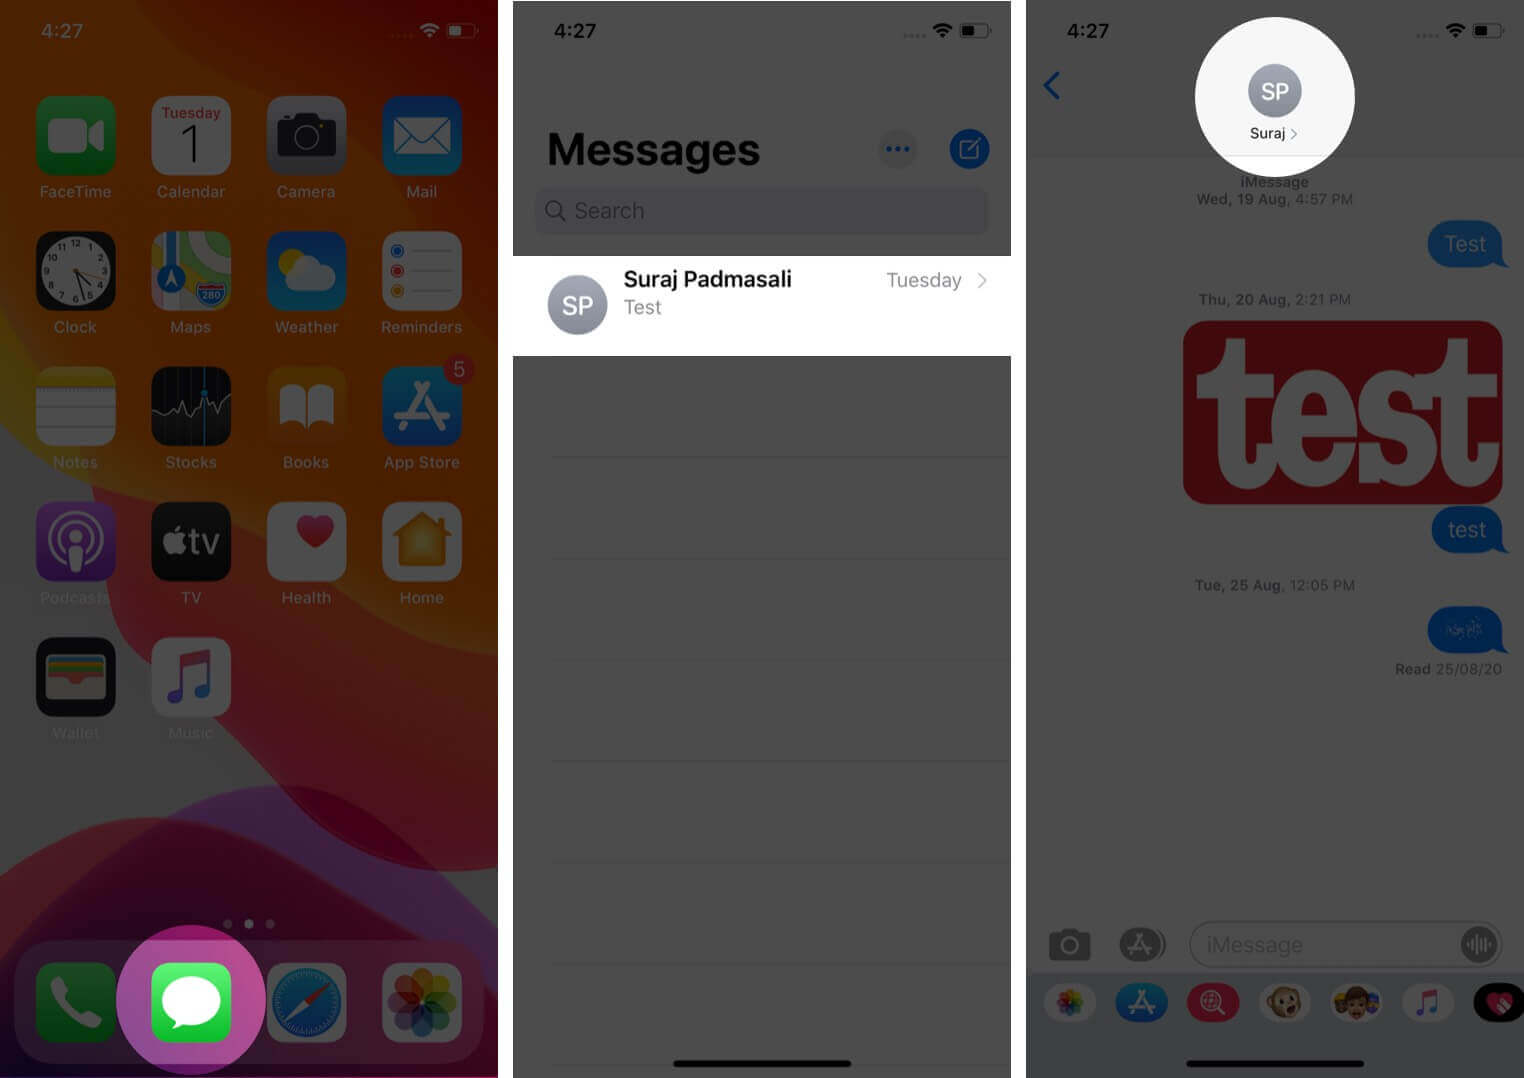 open messages app tap on conversation and then tap on contact name on iphone